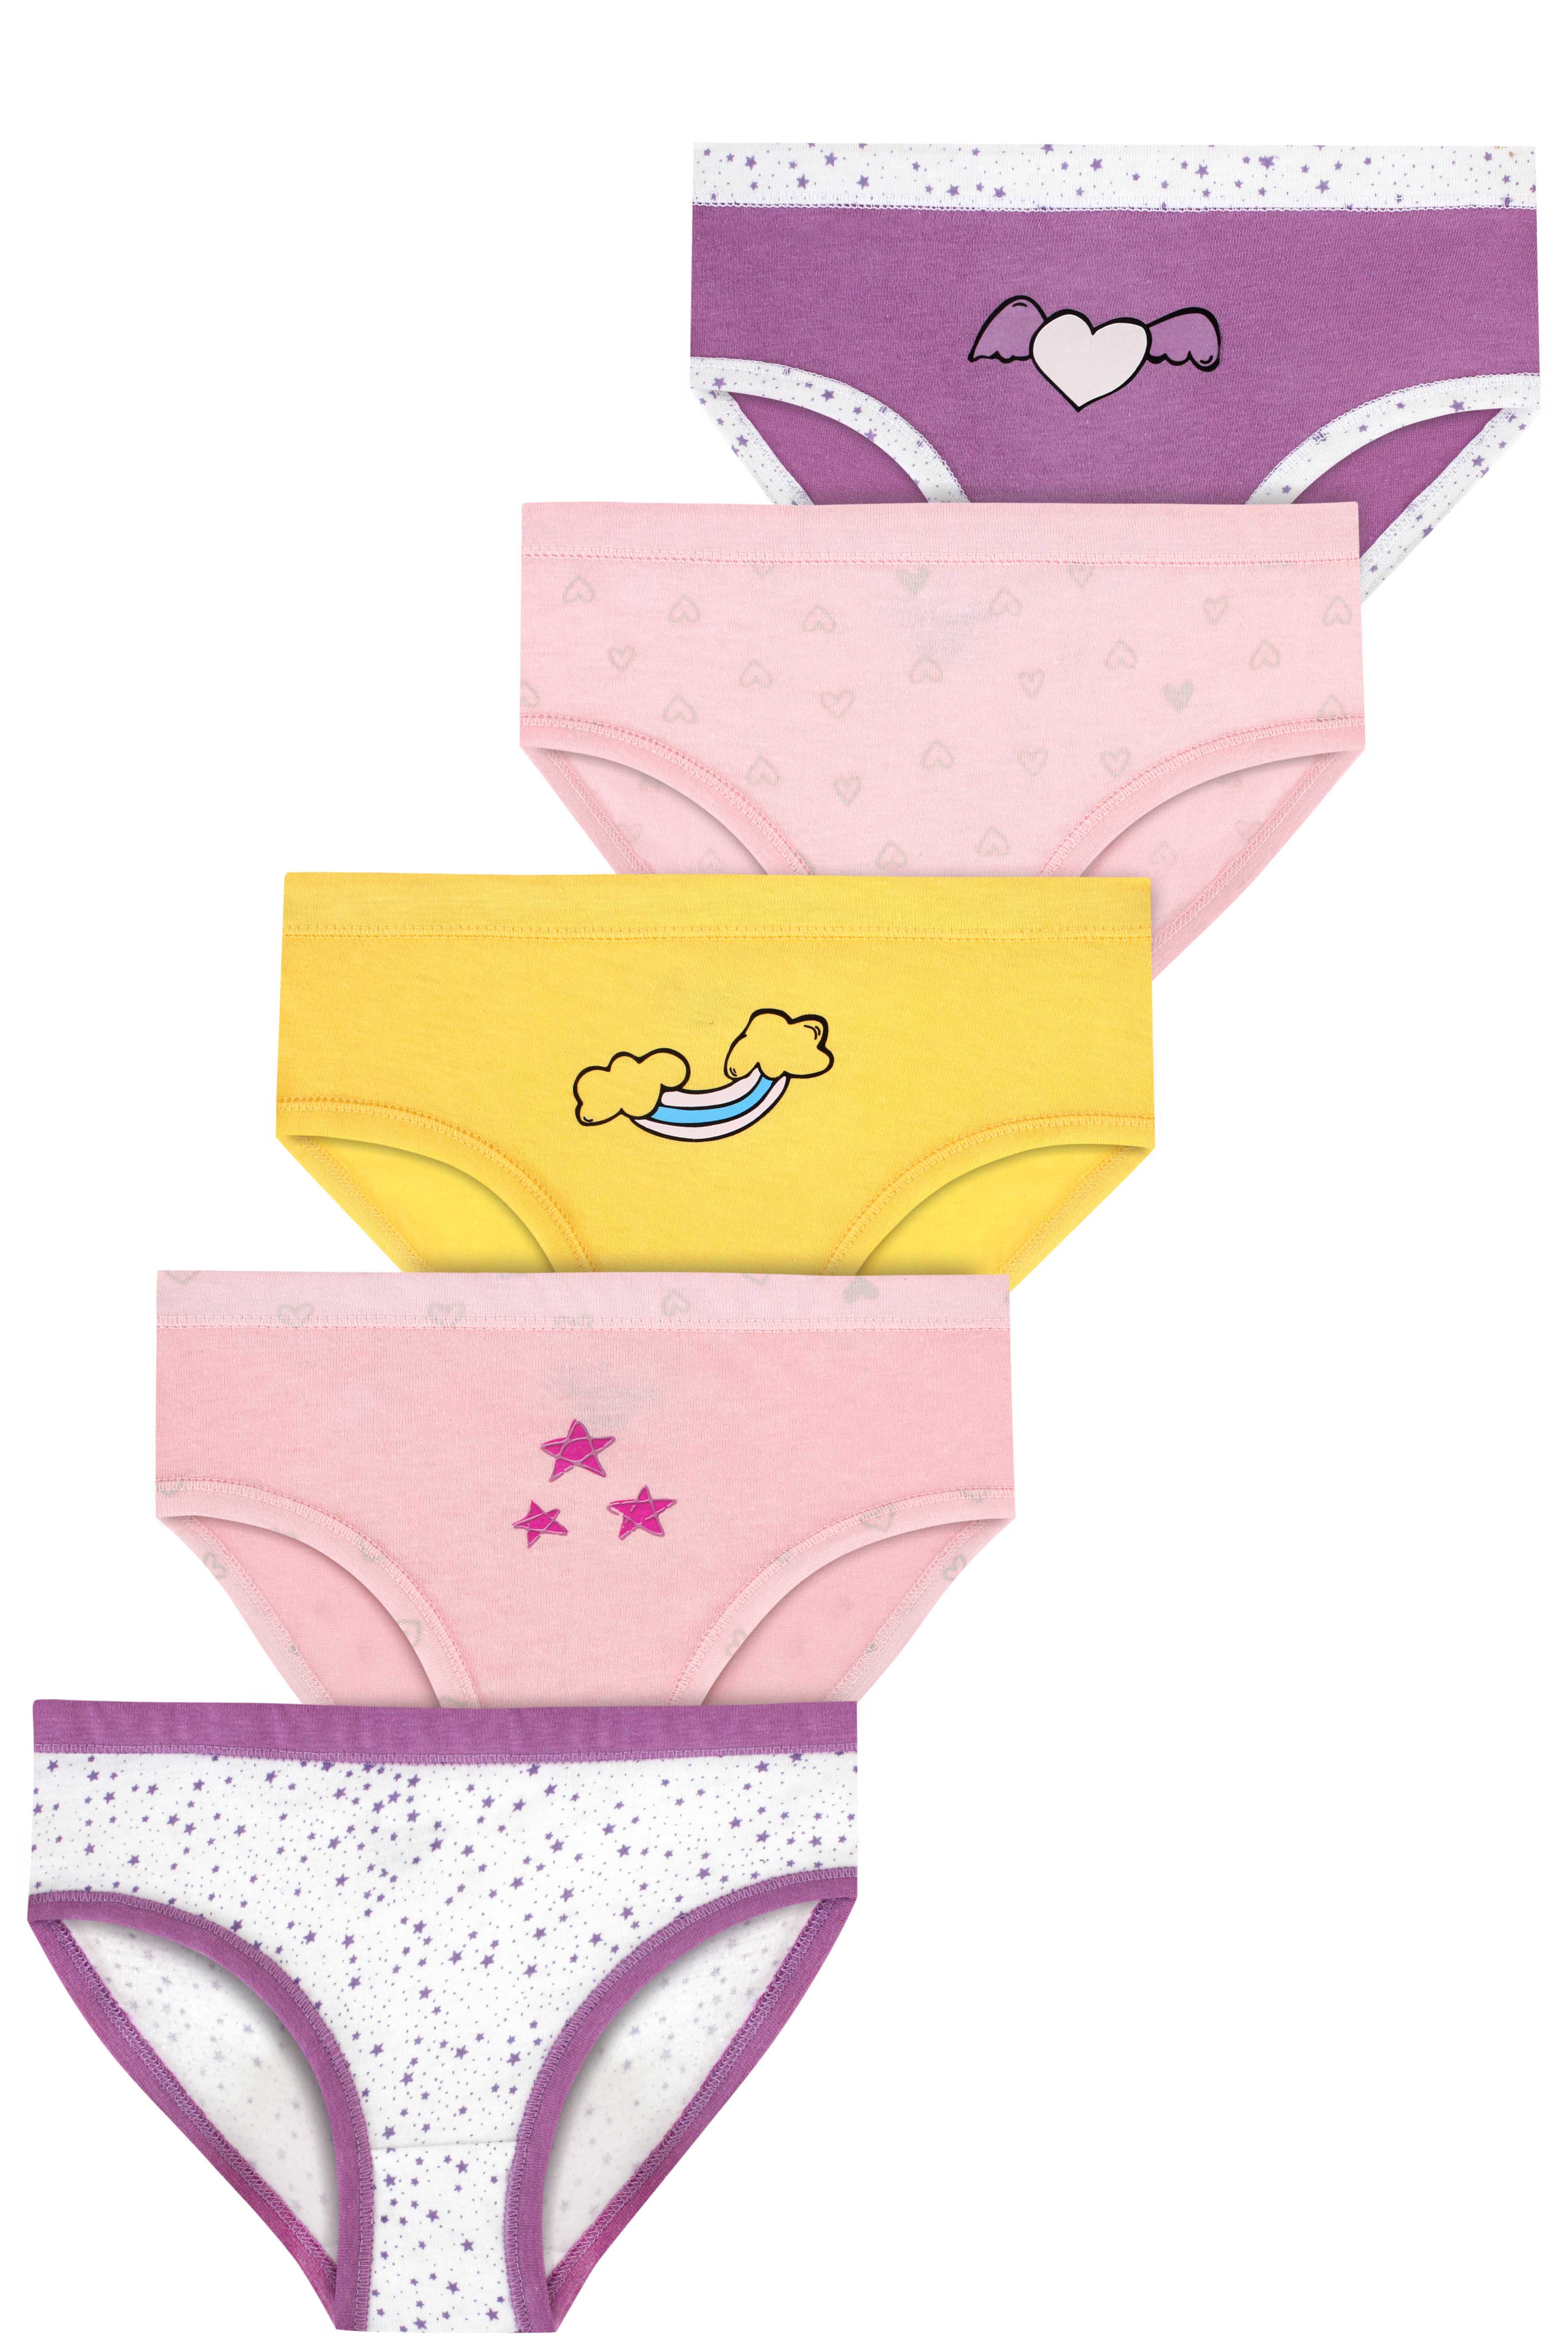 Girls Multipack Covered Elastic Briefs 100% Cotton